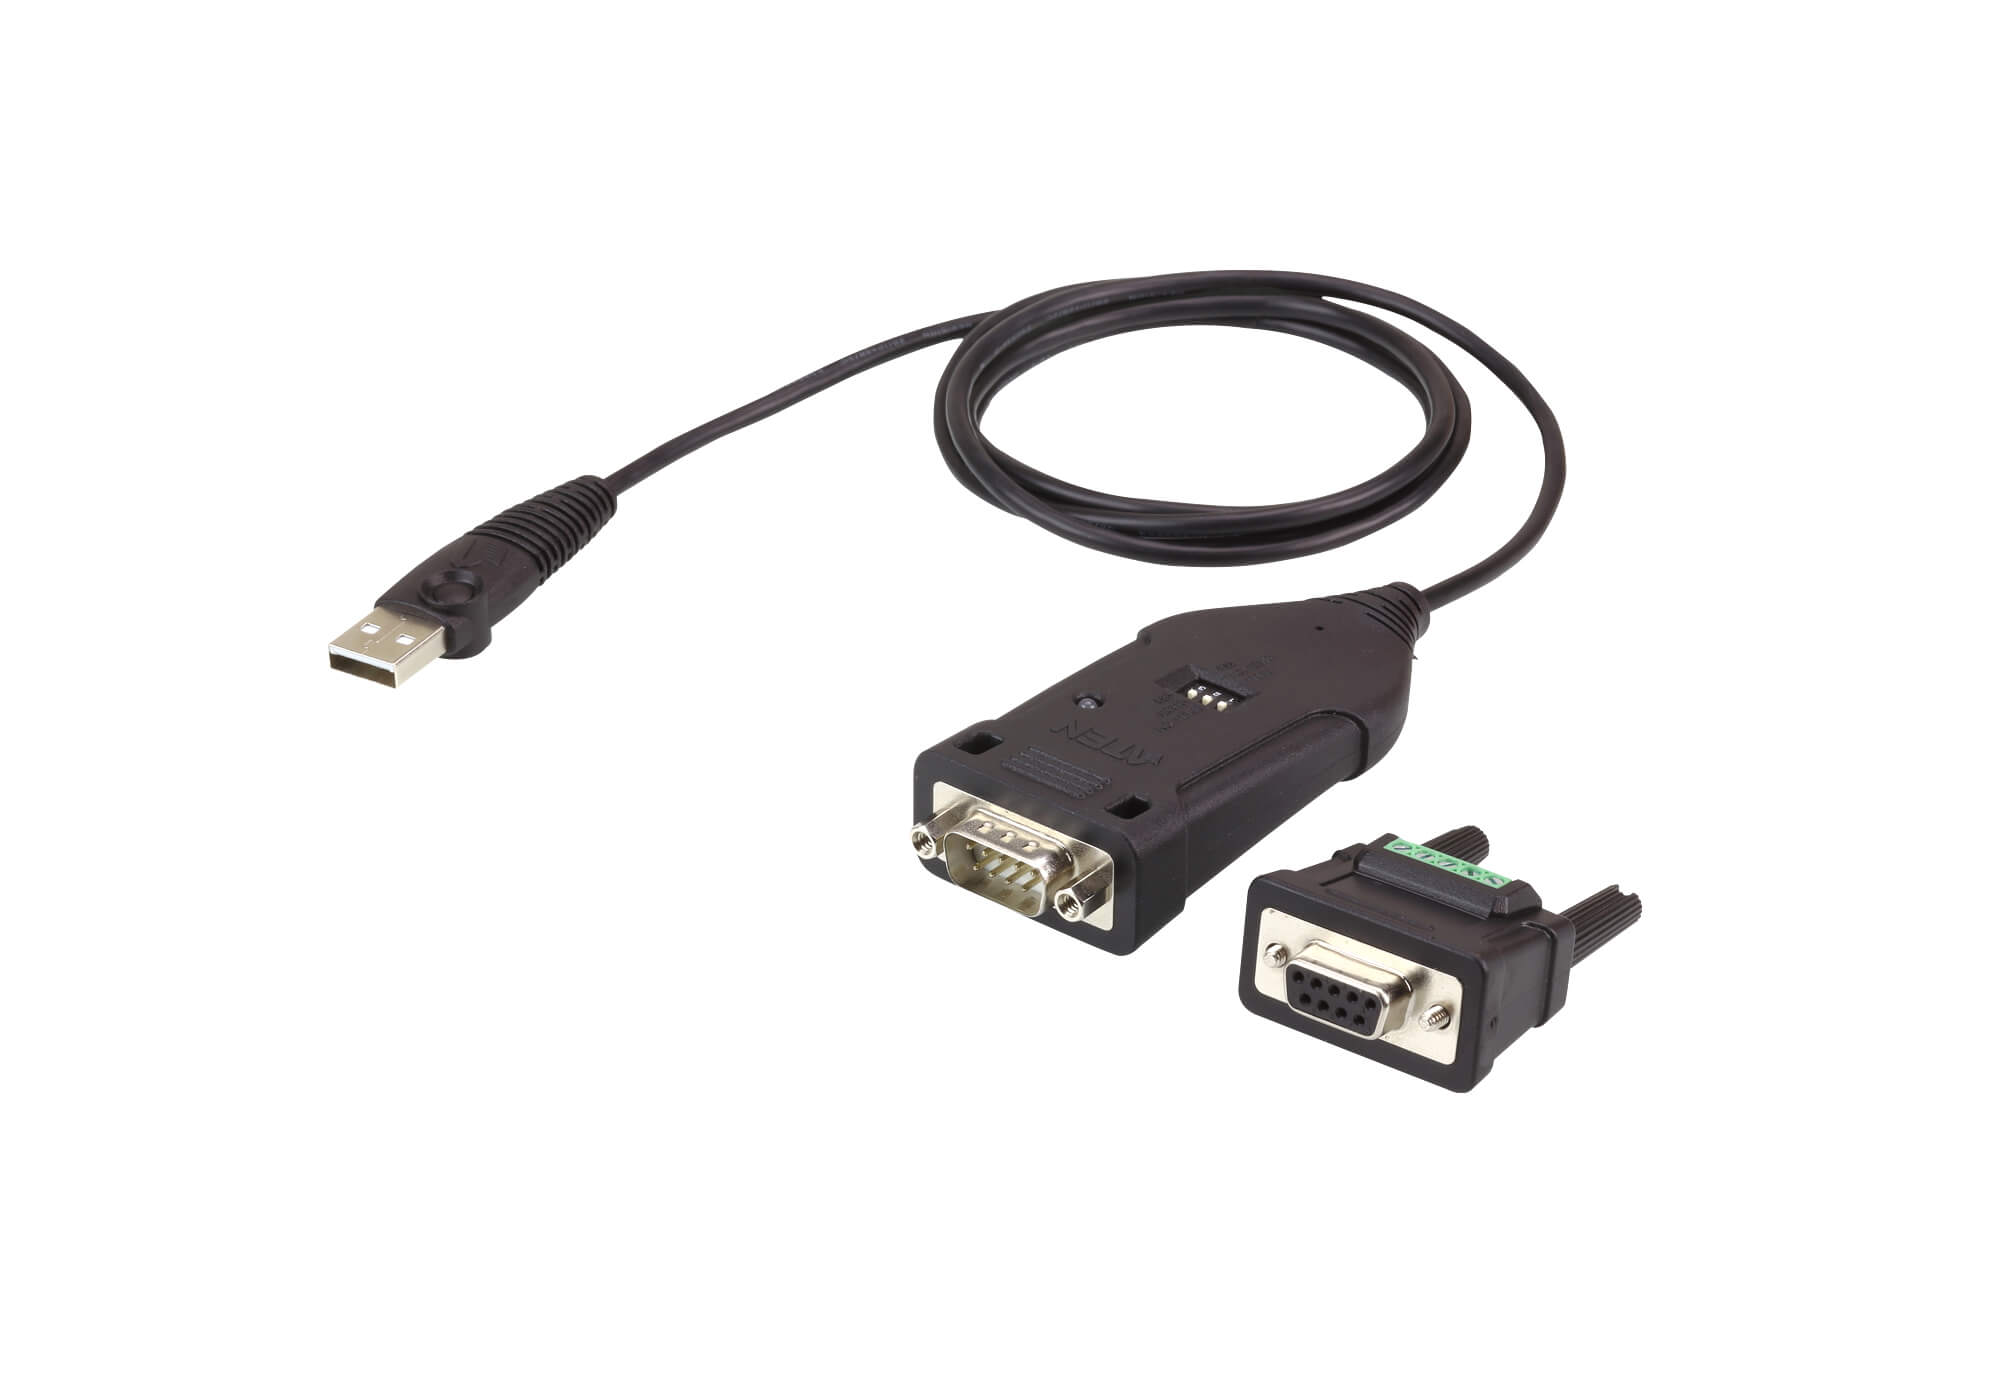 UC485 : USB to RS-422/485 Adapter